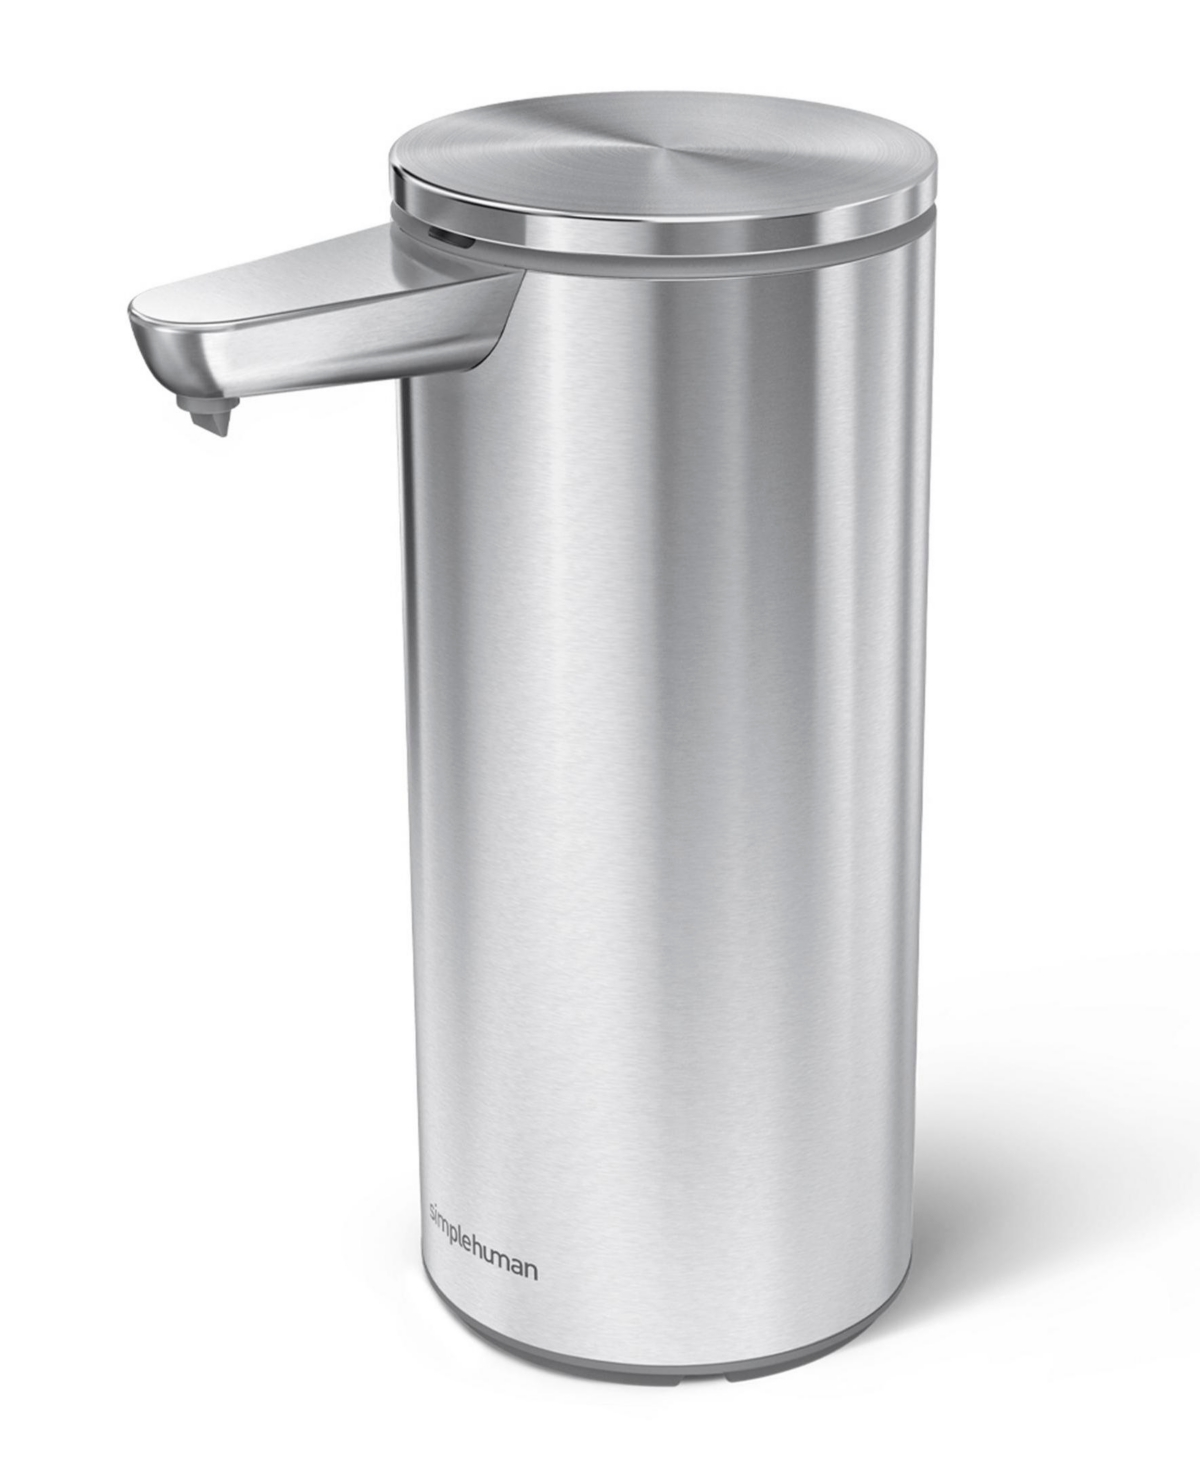 Simplehuman Rechargeable Sensor Soap Pump, 14 oz In Brushed Stainless Steel